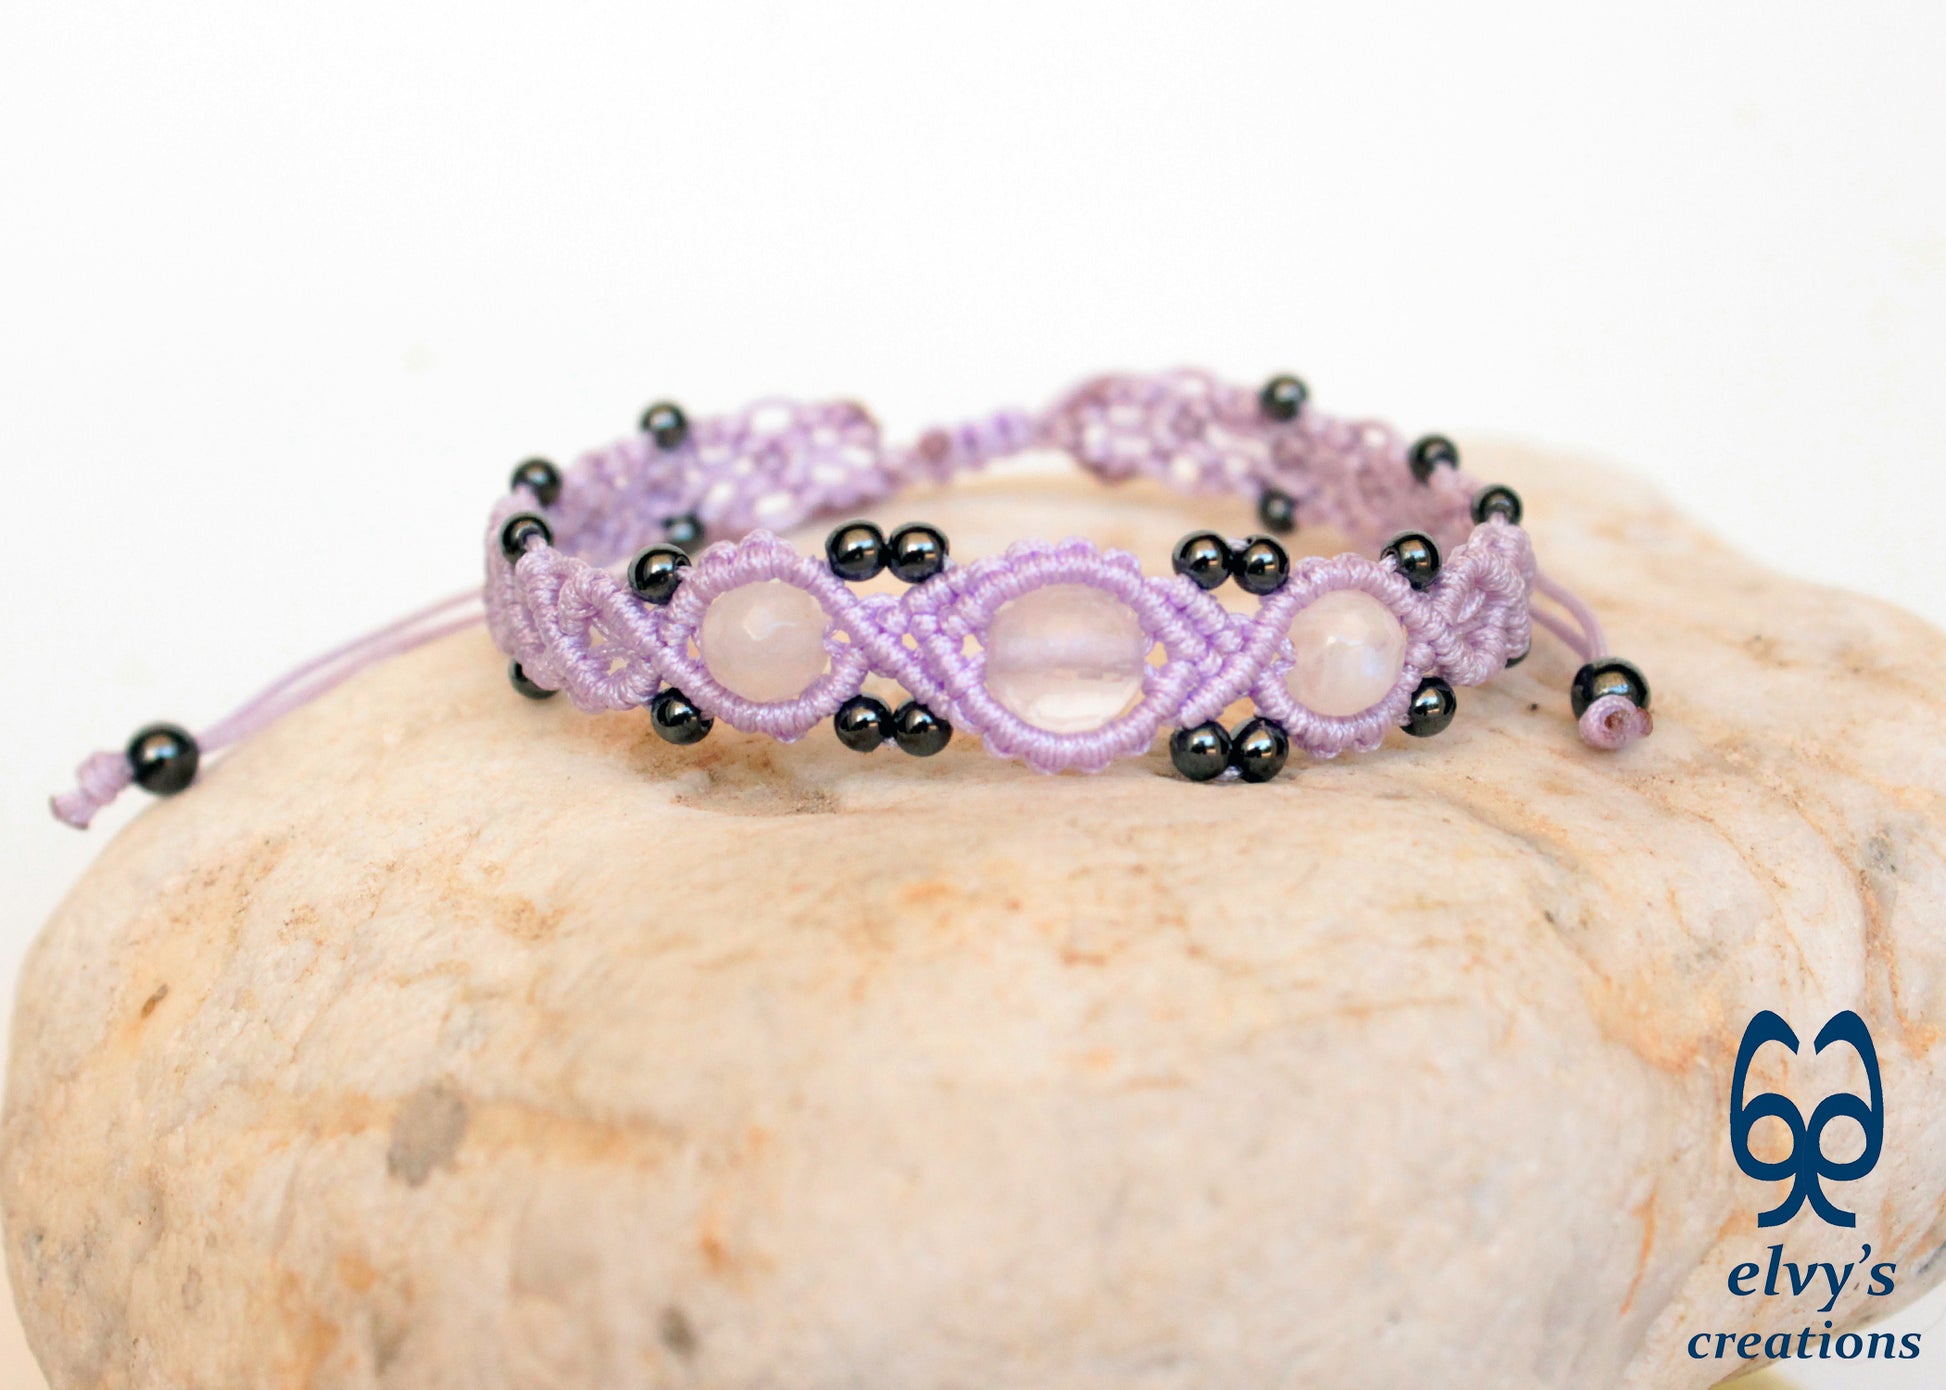 Purple Beaded Macrame Cuff Bracelet With White and Blue Quartz and Gray Hematite Gemstones Bracelet Gift for her